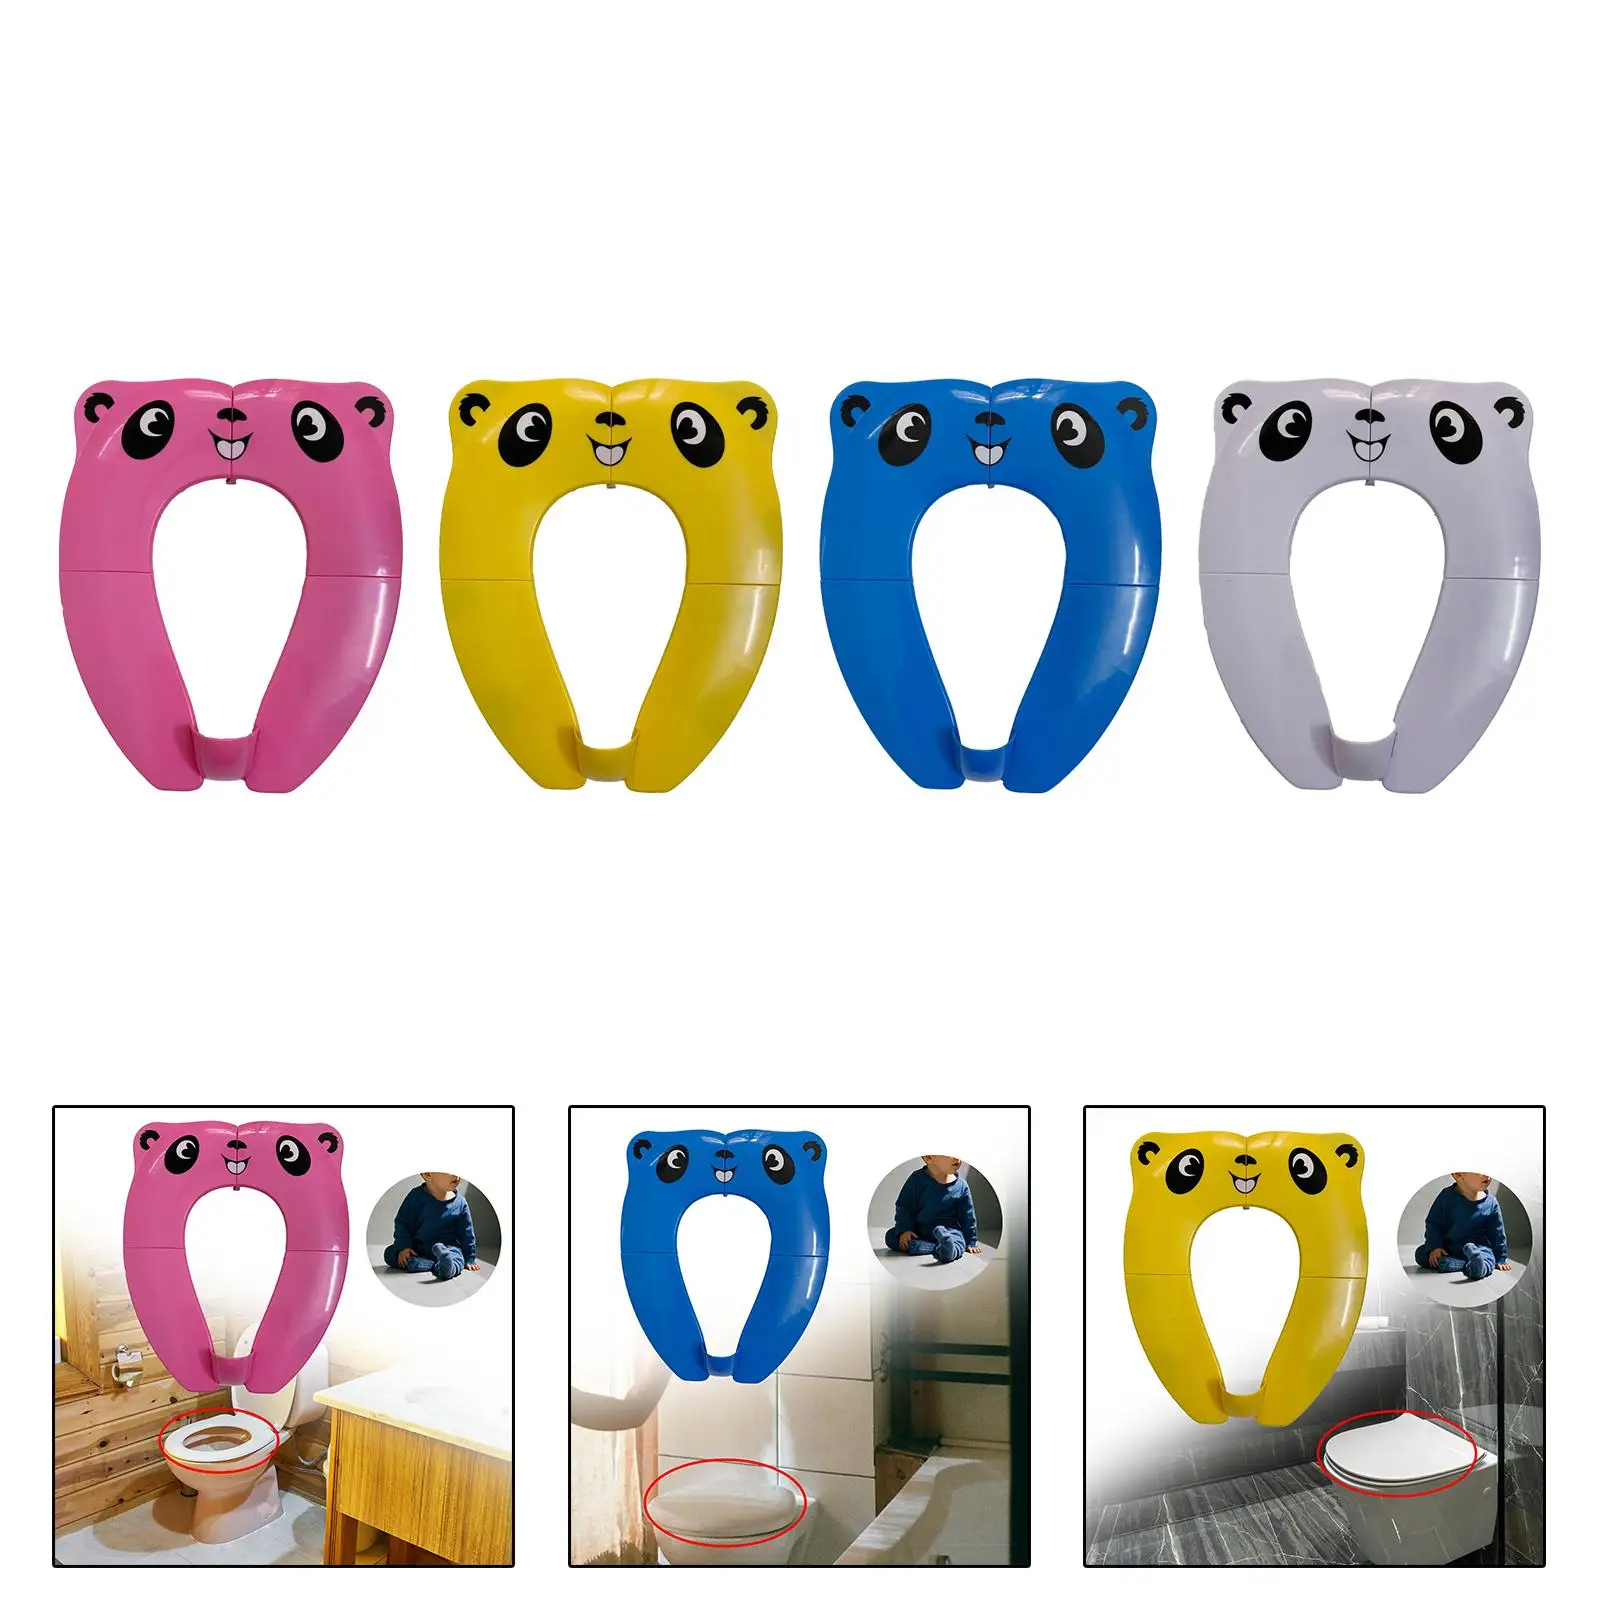 Foldable Travel Potty Seat Toilet Pad Potty Toilet Seat Non Slip Cushion for Household Children Toddlers Baby